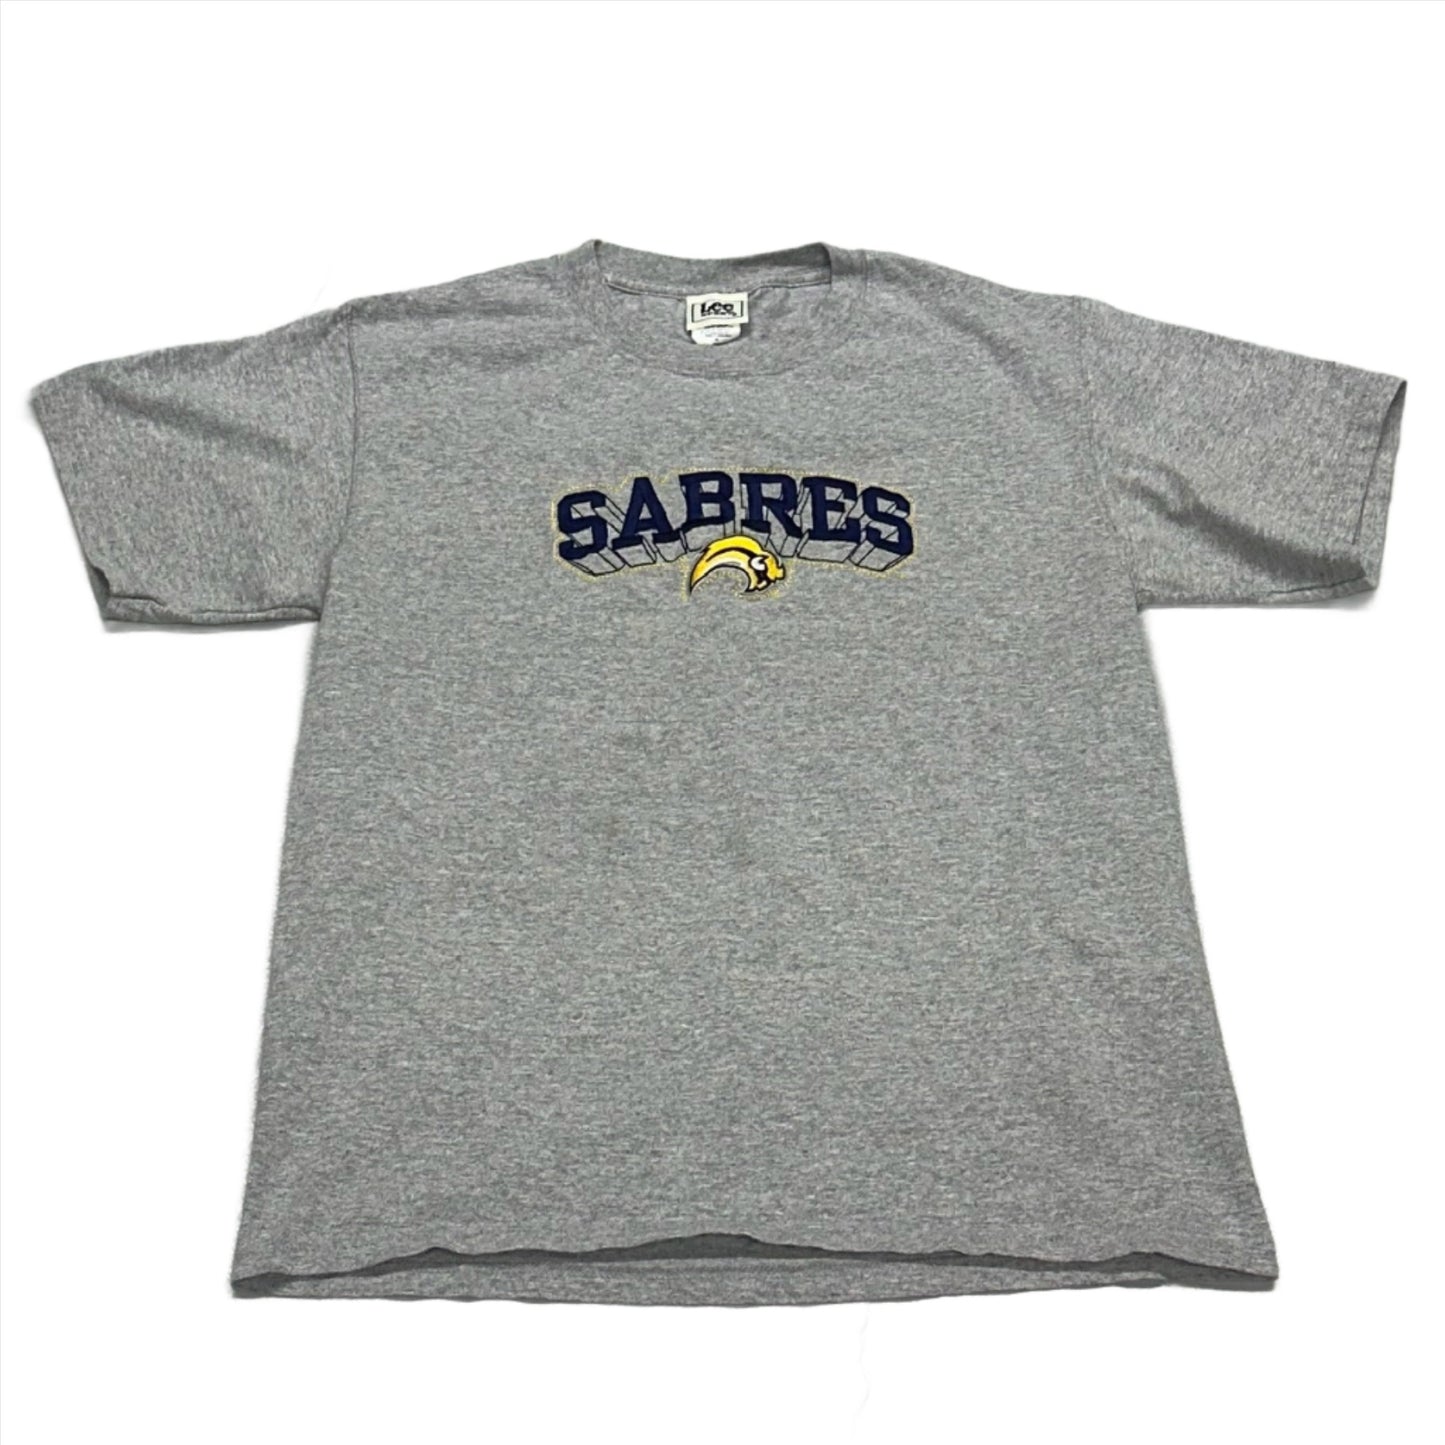 Buffalo Sabres, 2000s Embroidered T-shirt, Size: Medium